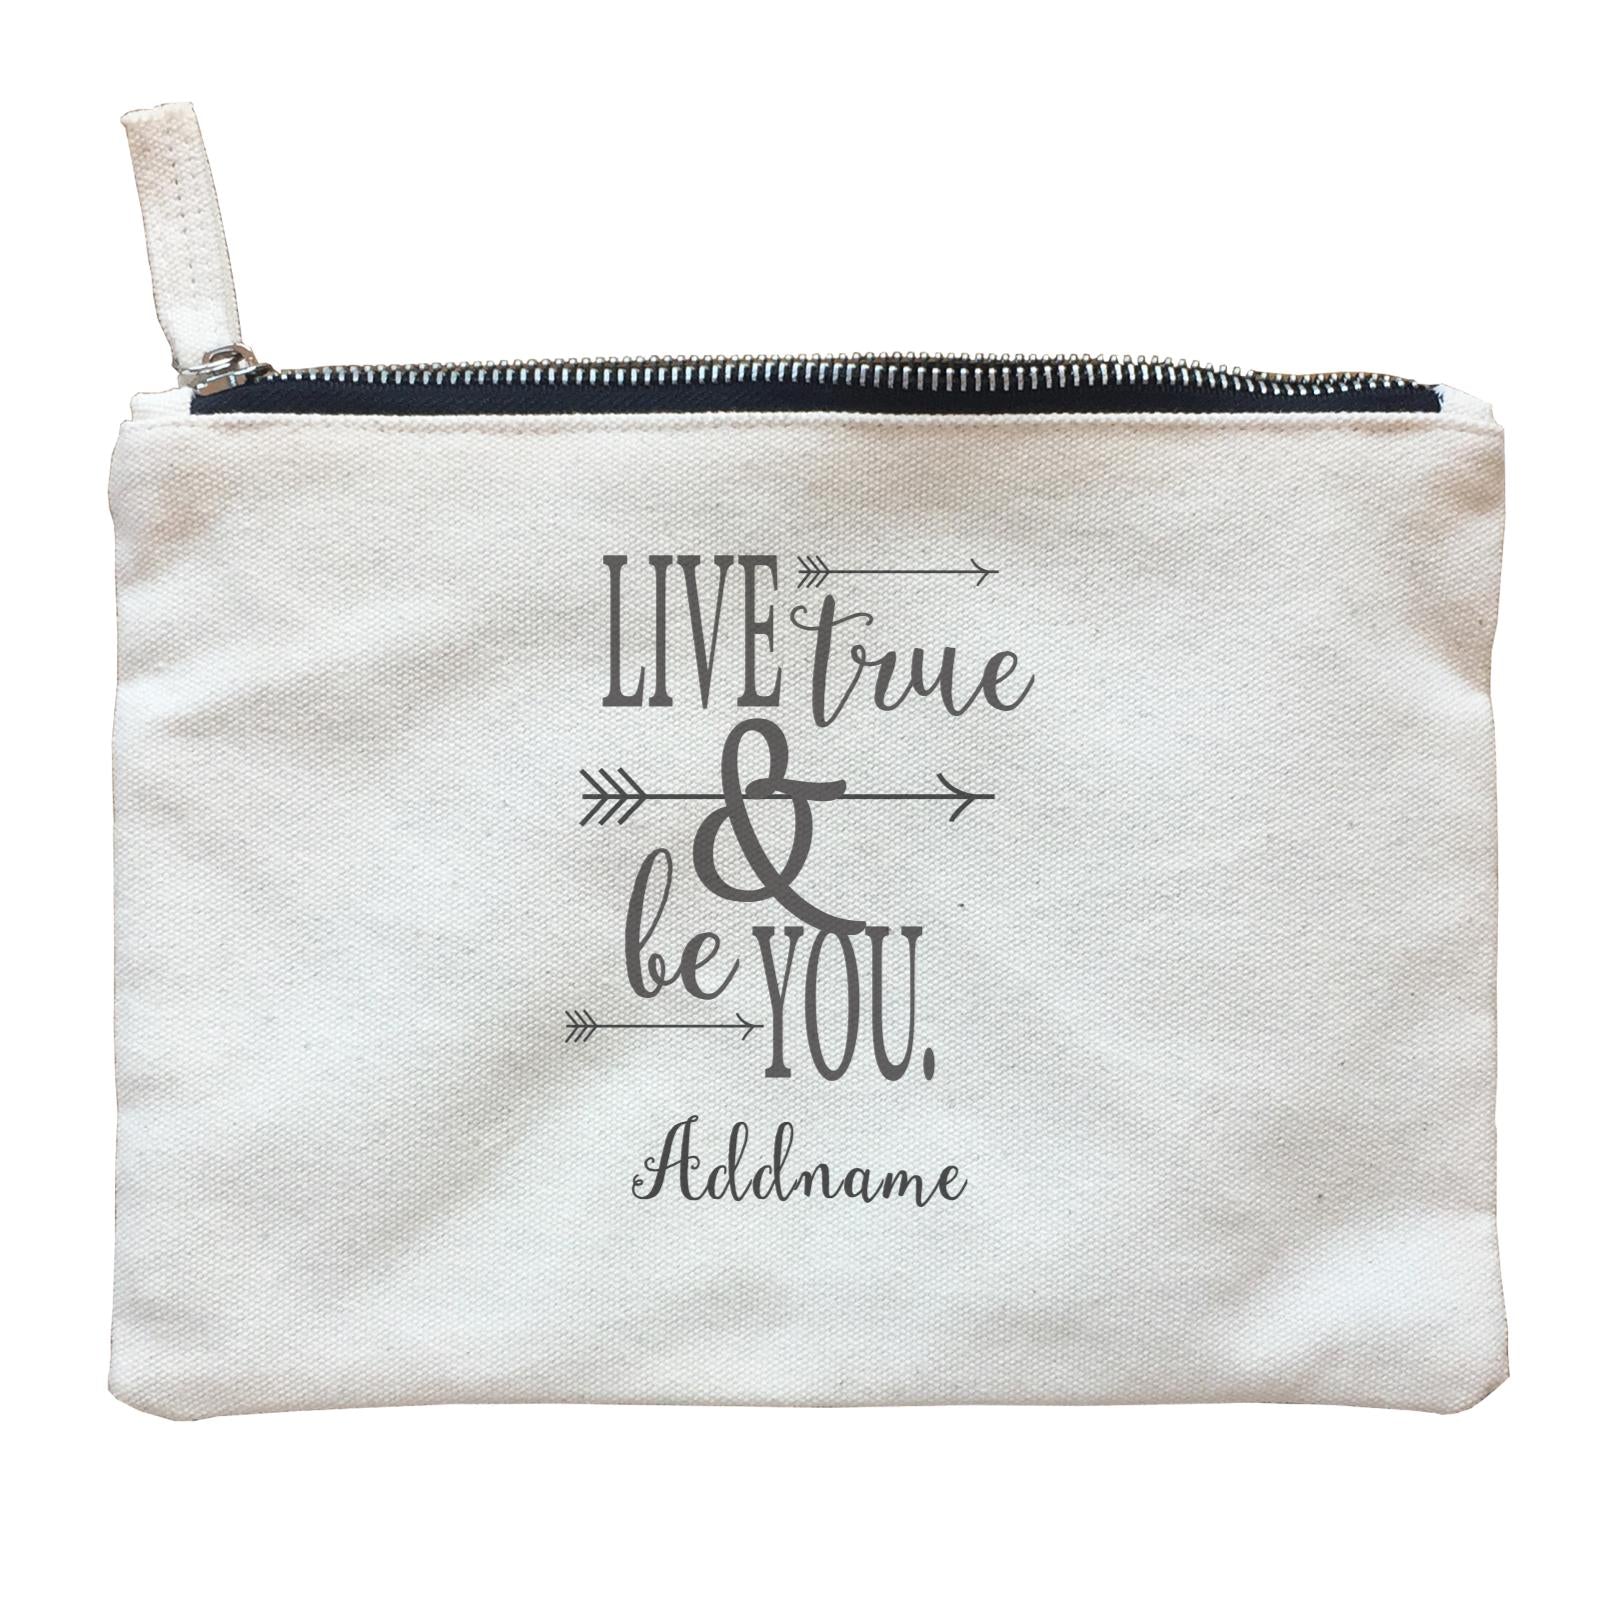 Inspiration Quotes Live True And Be You Addname Zipper Pouch